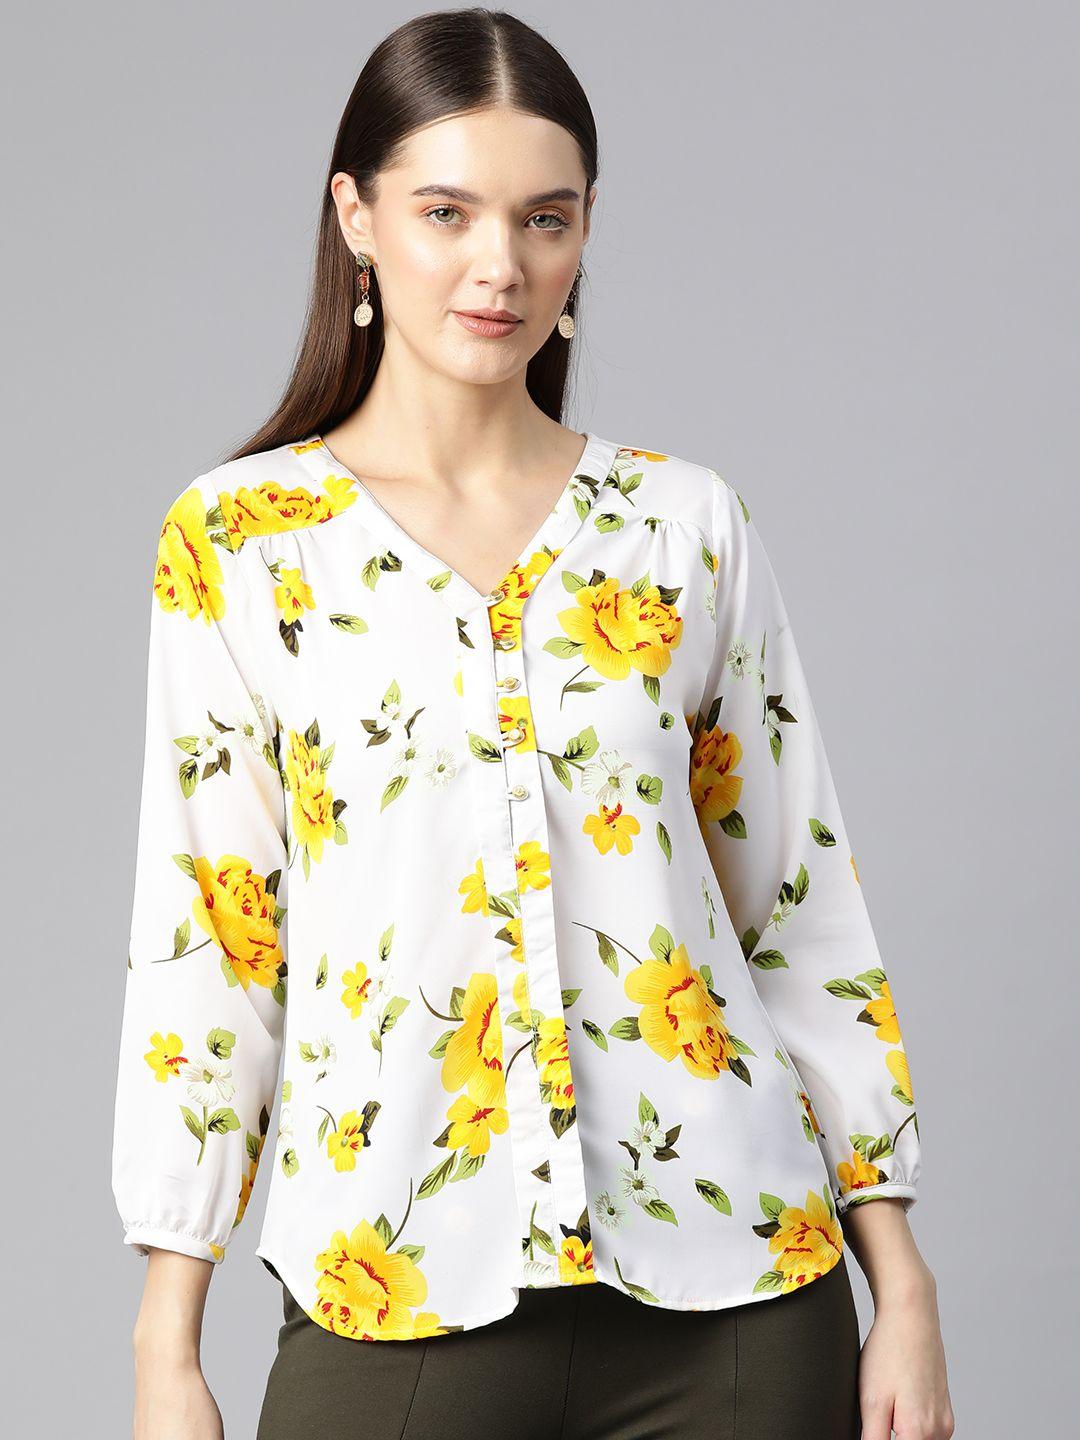 ives floral print puff sleeves crepe shirt style top